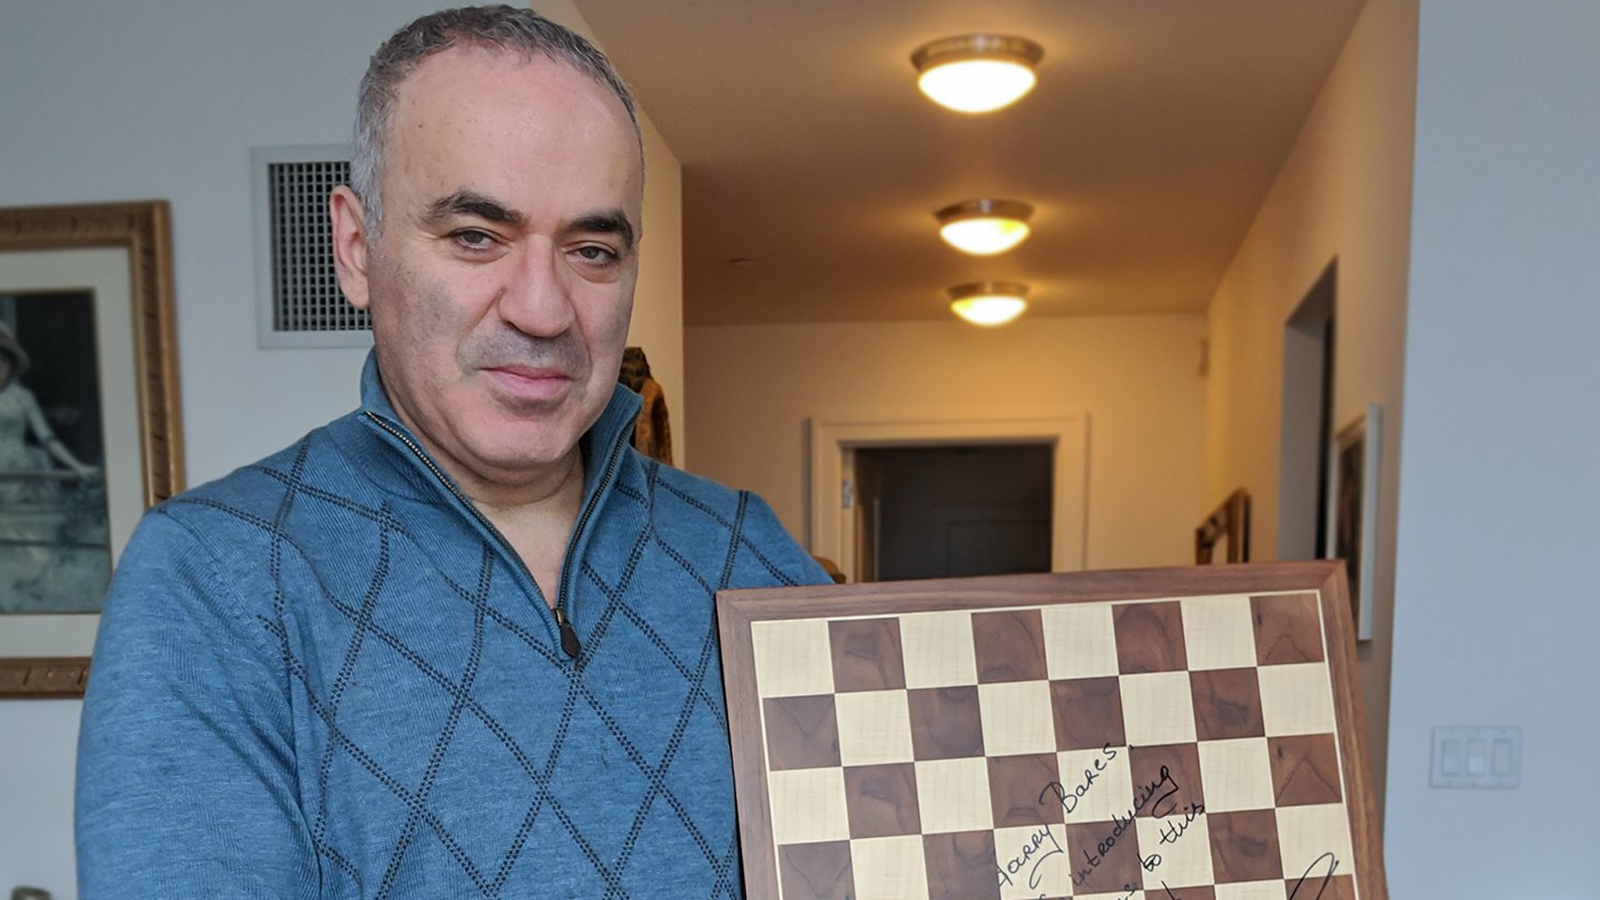 Kasparov & Carlsen to play for 1st time in 16 years